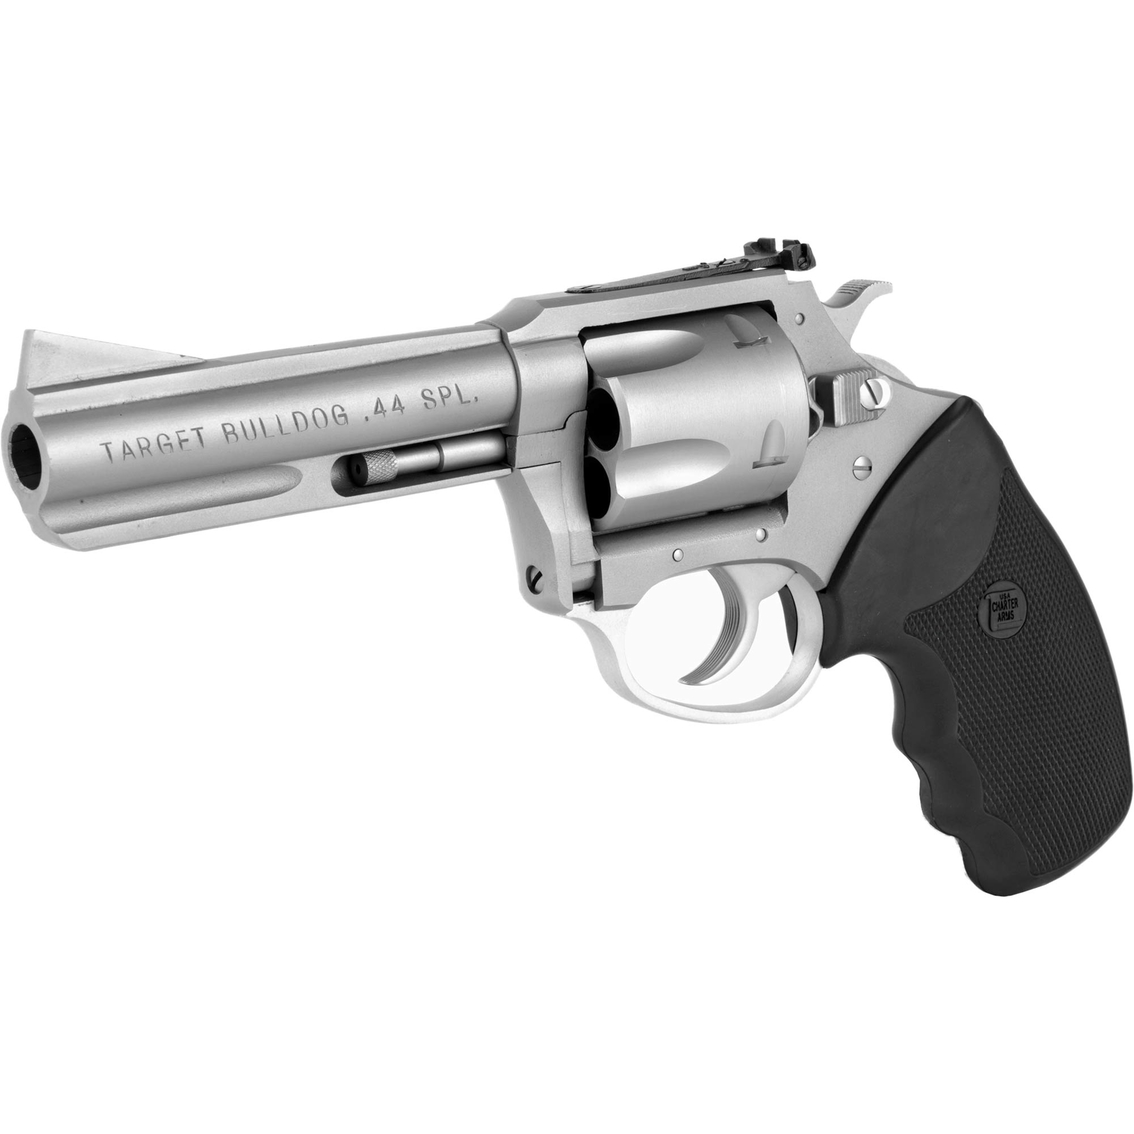 Charter Arms Bulldog 44 Special 4.2 In. Barrel 5 Rds